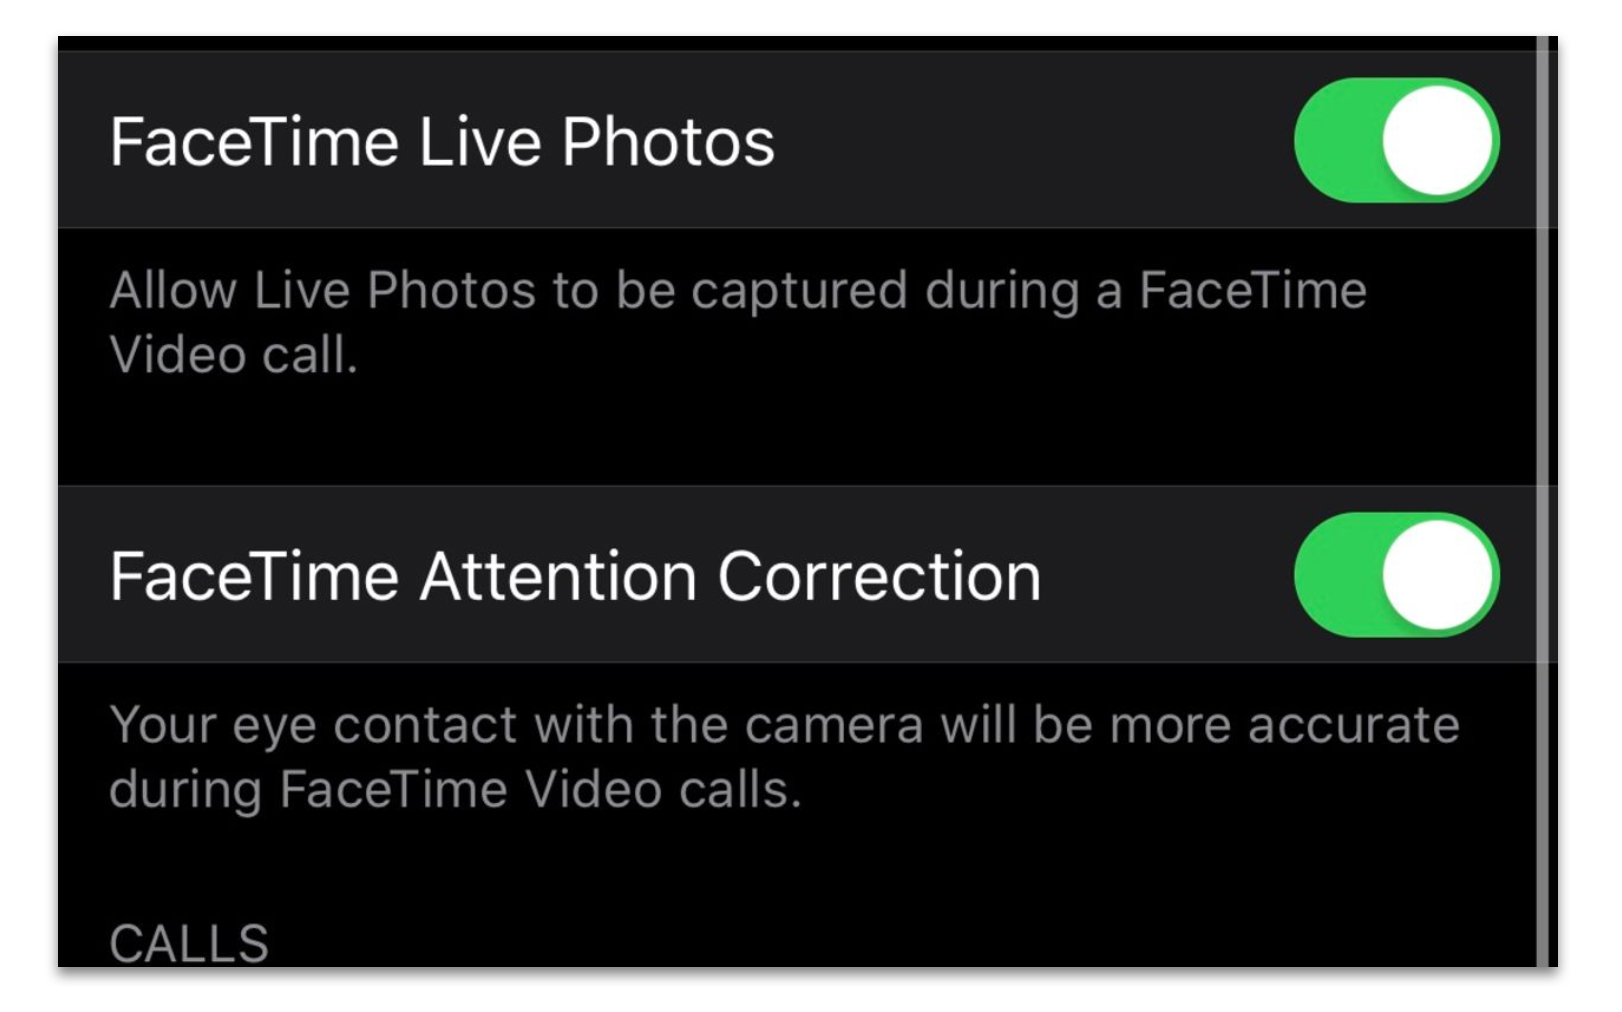 4706971_FaceTime_Attention_Correction_tinhte.jpg